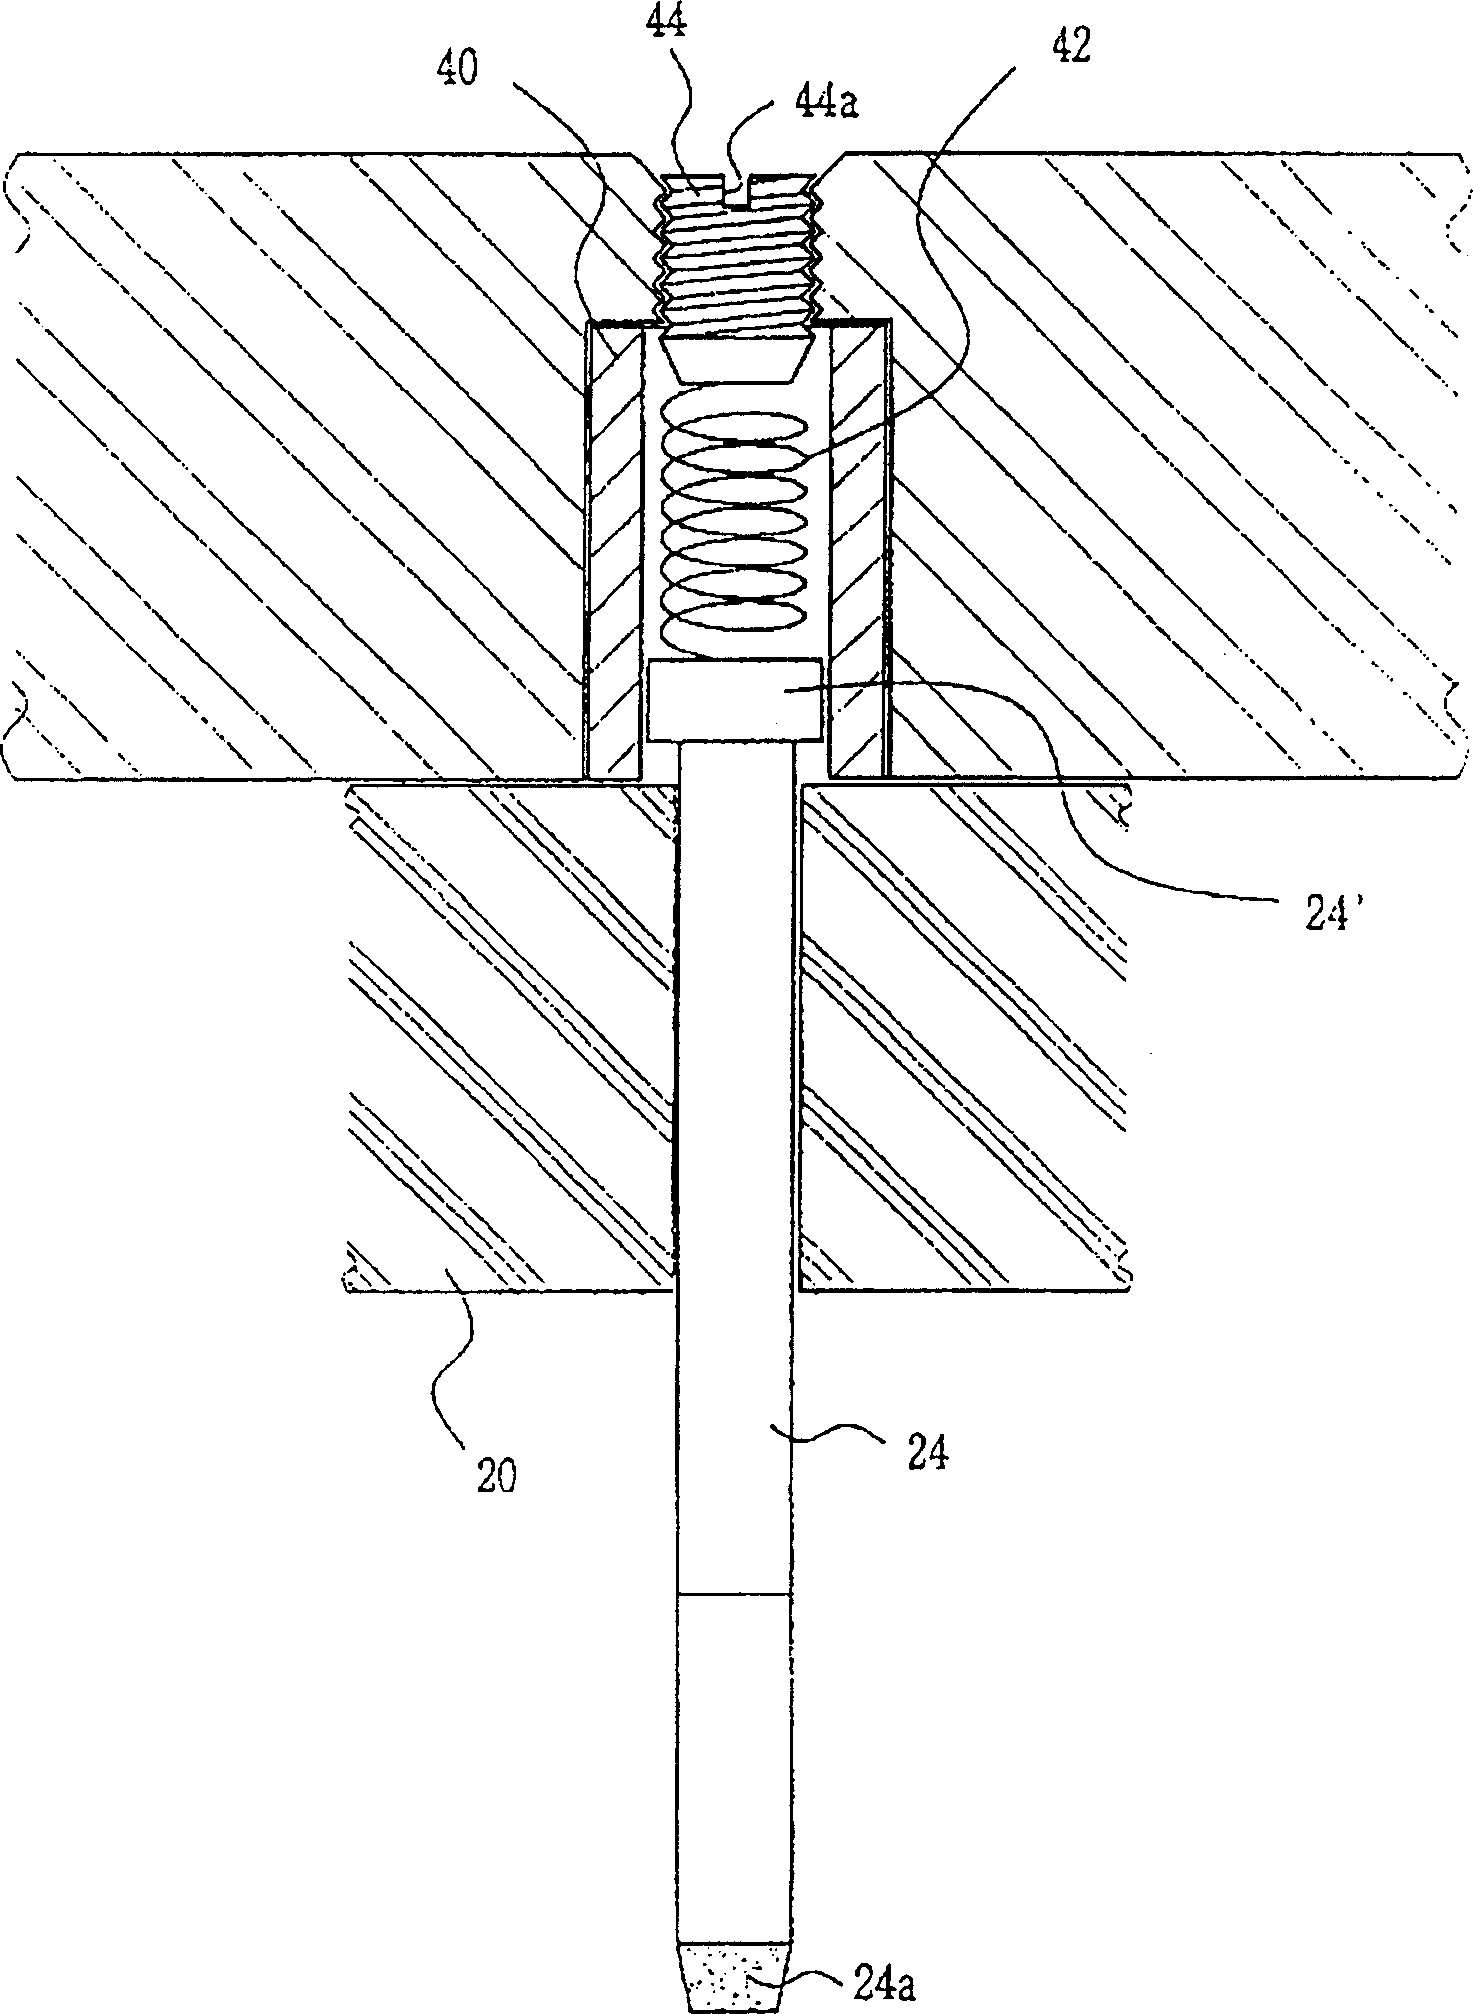 Method of manufacturing an aluminum design tab end for a beverage can